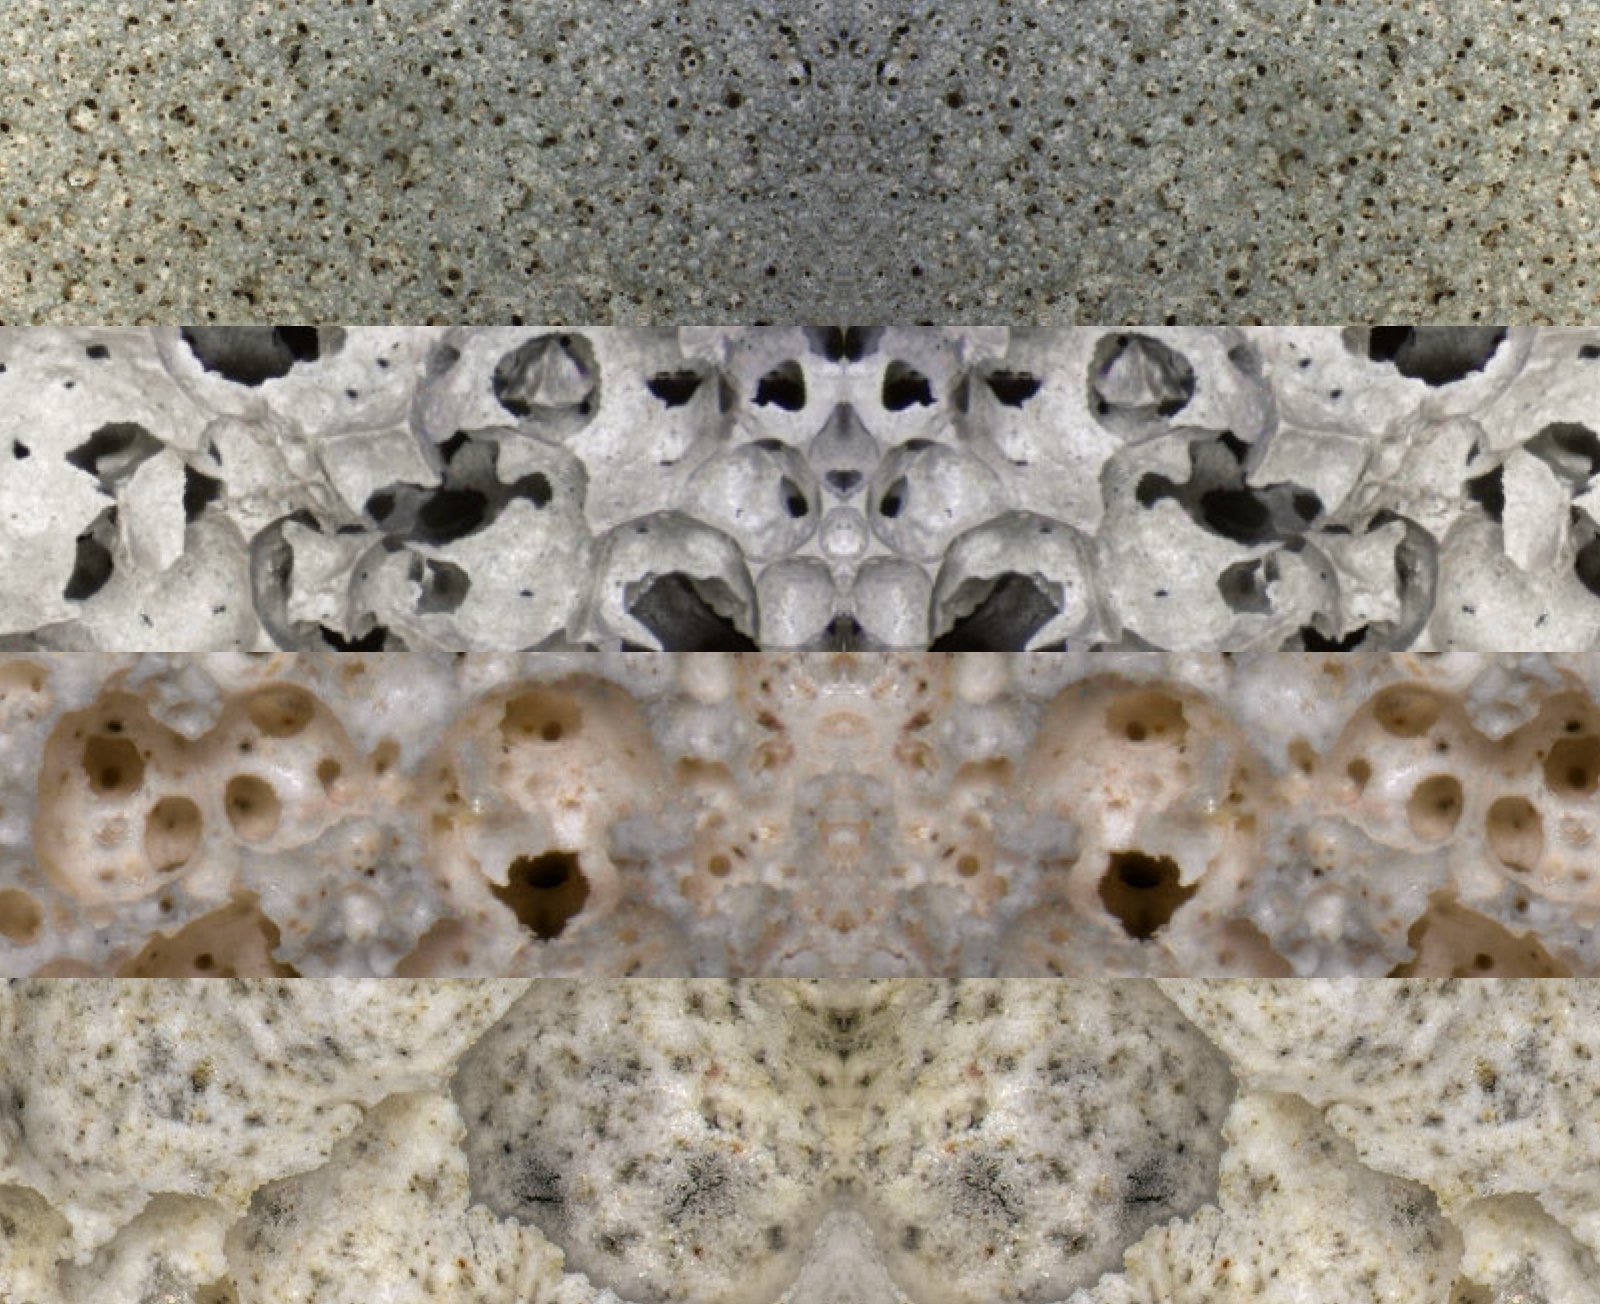 Four horizontal images of different foam concrete under the microscope with round pores from fine to coarse.